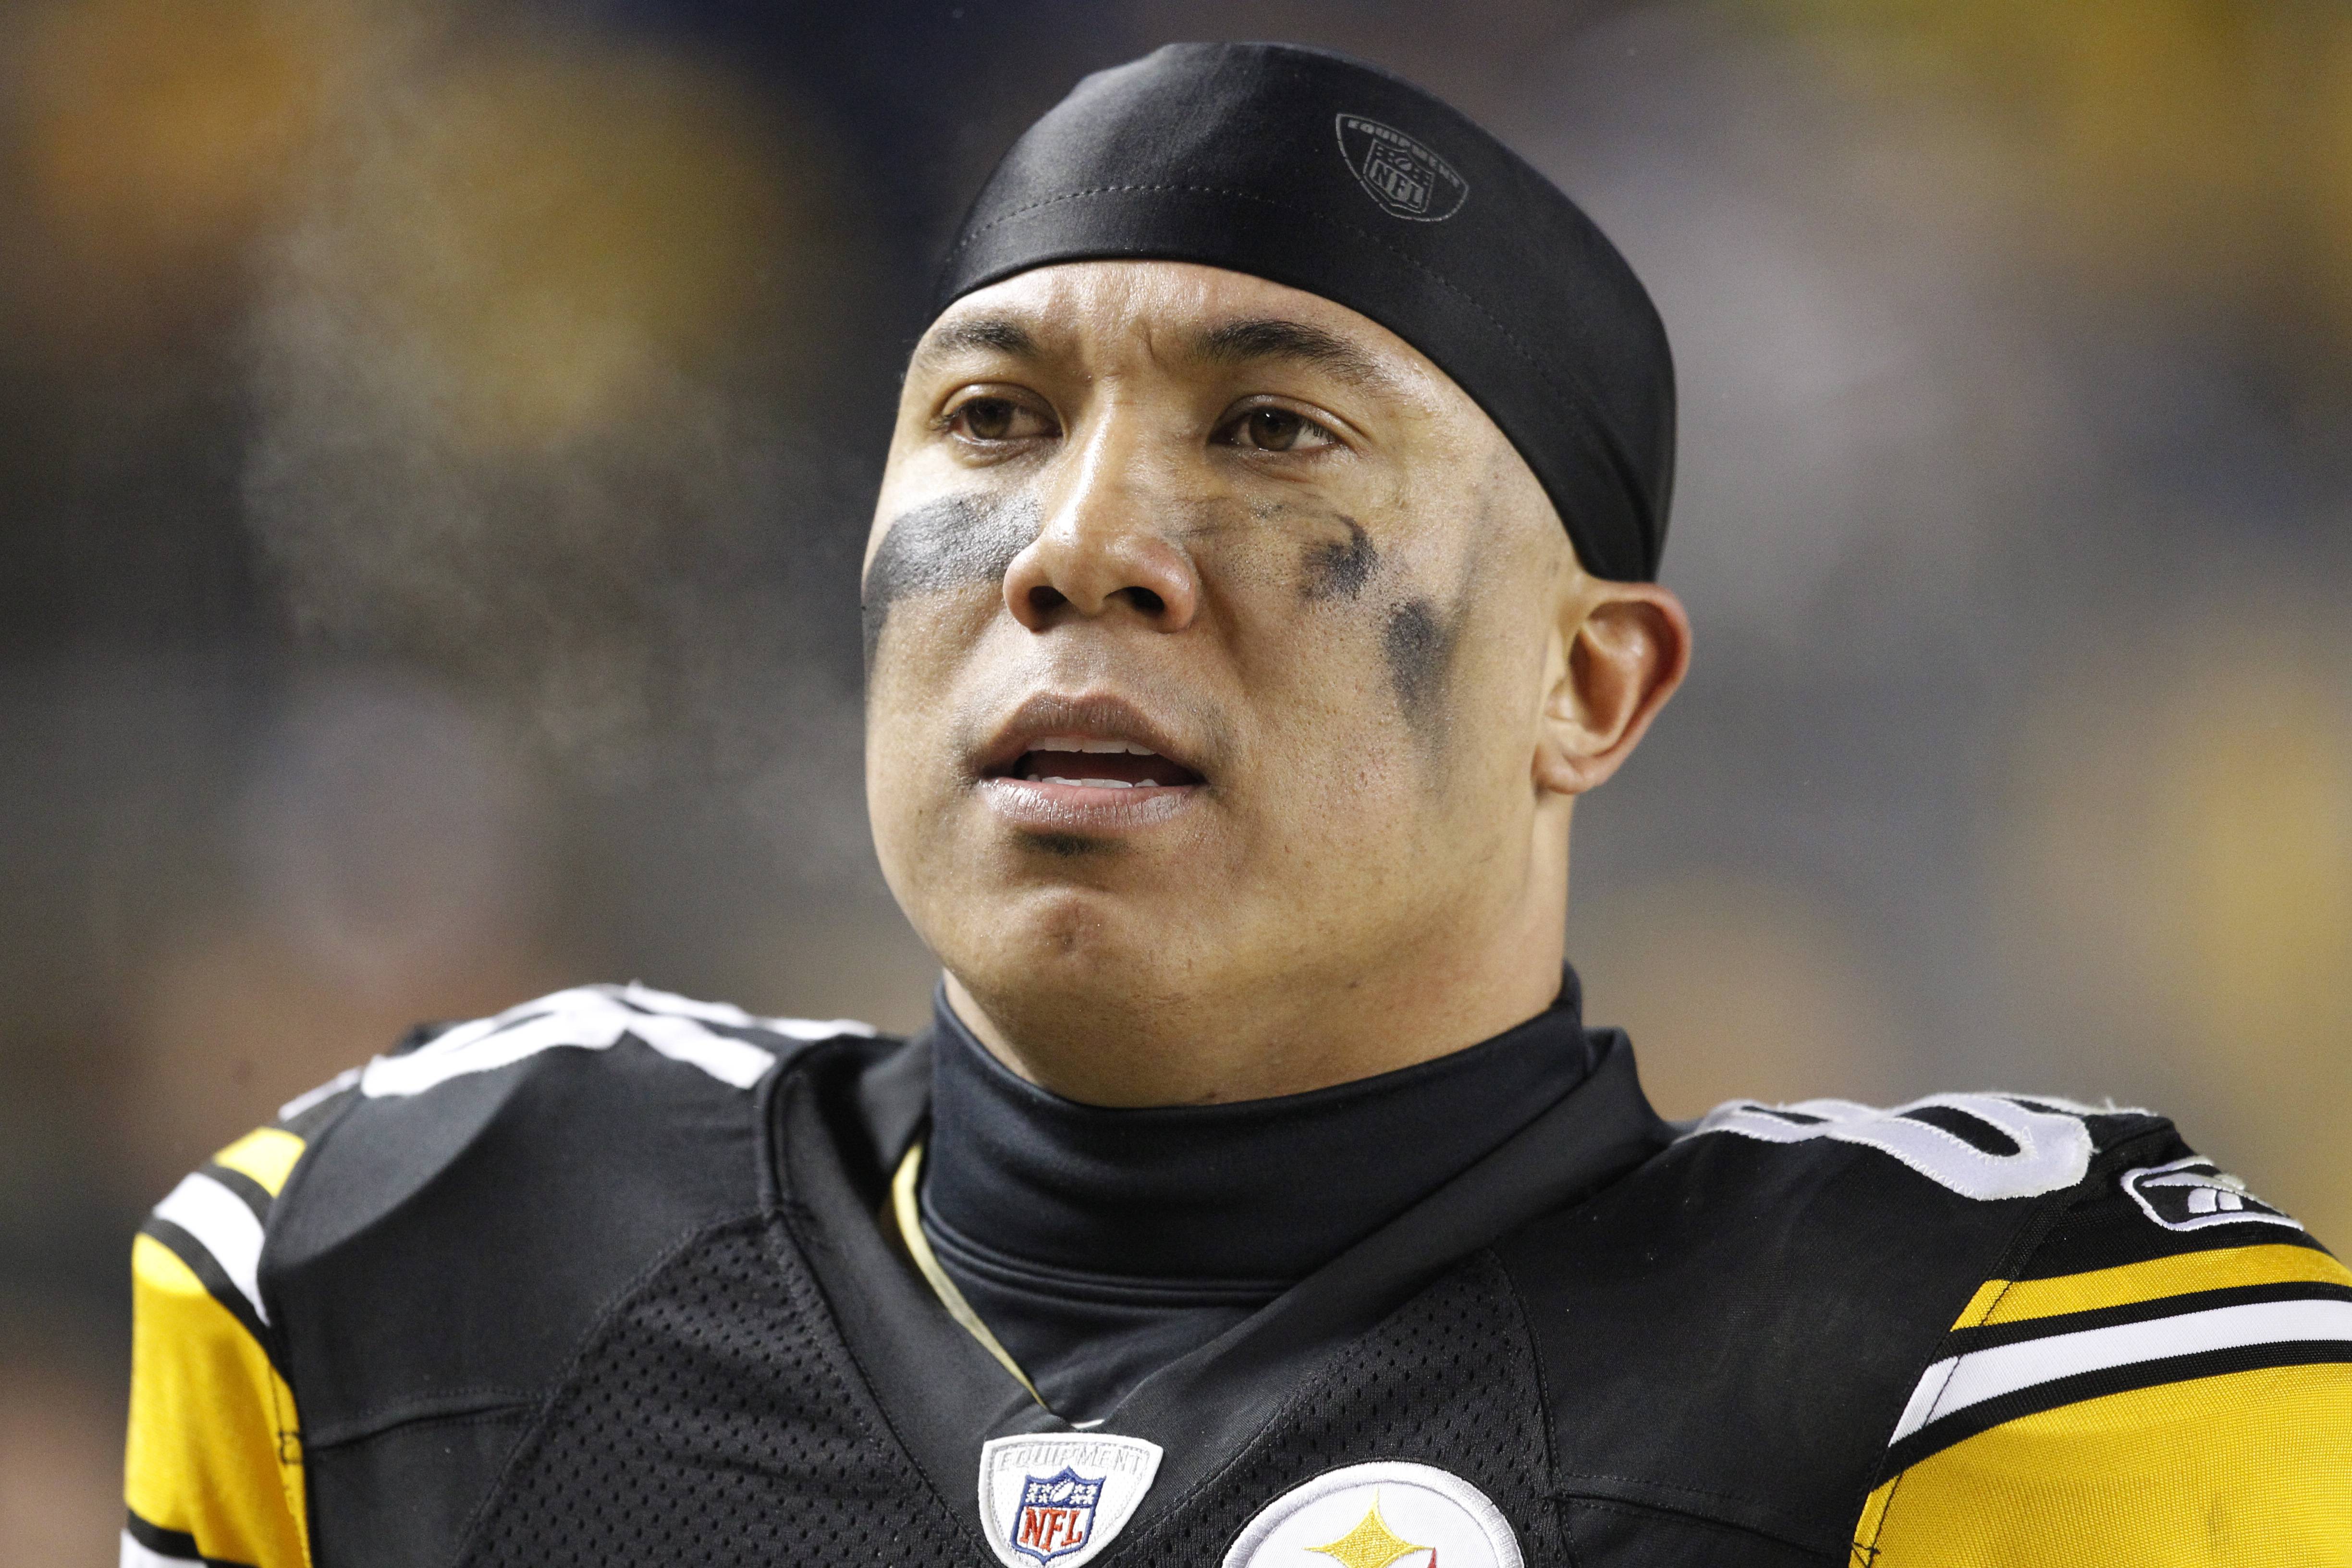 Hines Ward Charged With DUI - Steelers receiver and Dancing With the Stars champ Hines Ward was arrested early Saturday in Atlanta and charged with driving under the influence. He was released on $1,300 bond.\r(Photo: AP Photo/Gene J. Puskar, File)